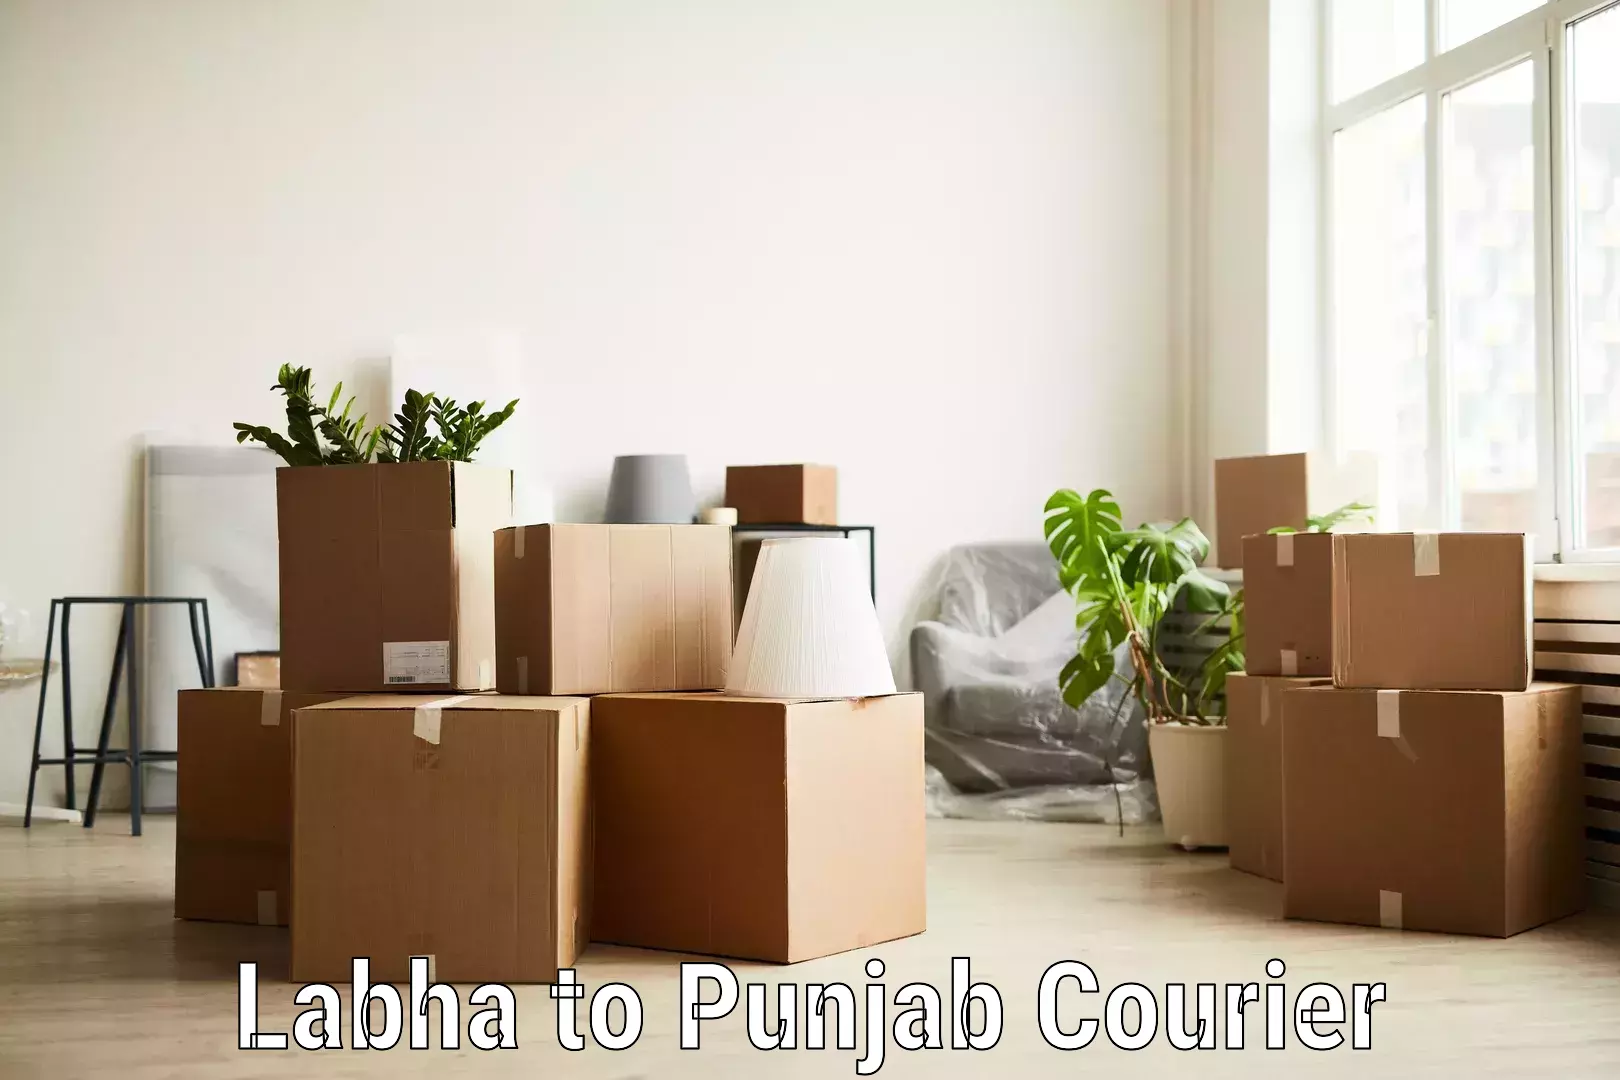 Reliable package handling Labha to Amritsar